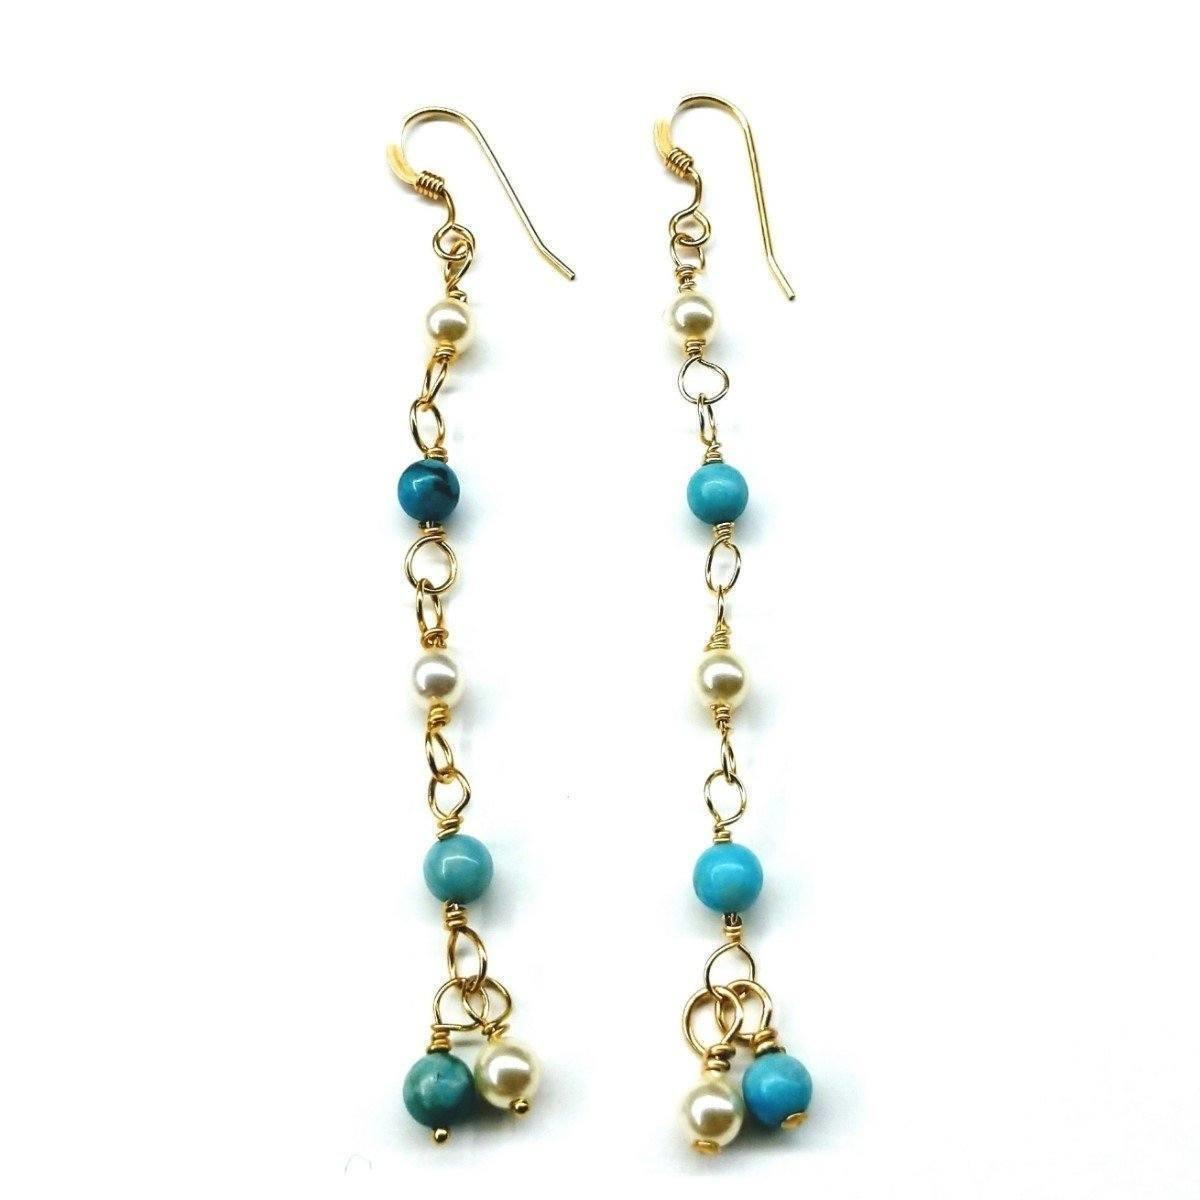 Long Turquoise Pearl Dangle Earrings - 14 KT Gold-Filled with Swarovski Pearls and Magnesite Beads - Earrings - Bijou Her -  -  - 